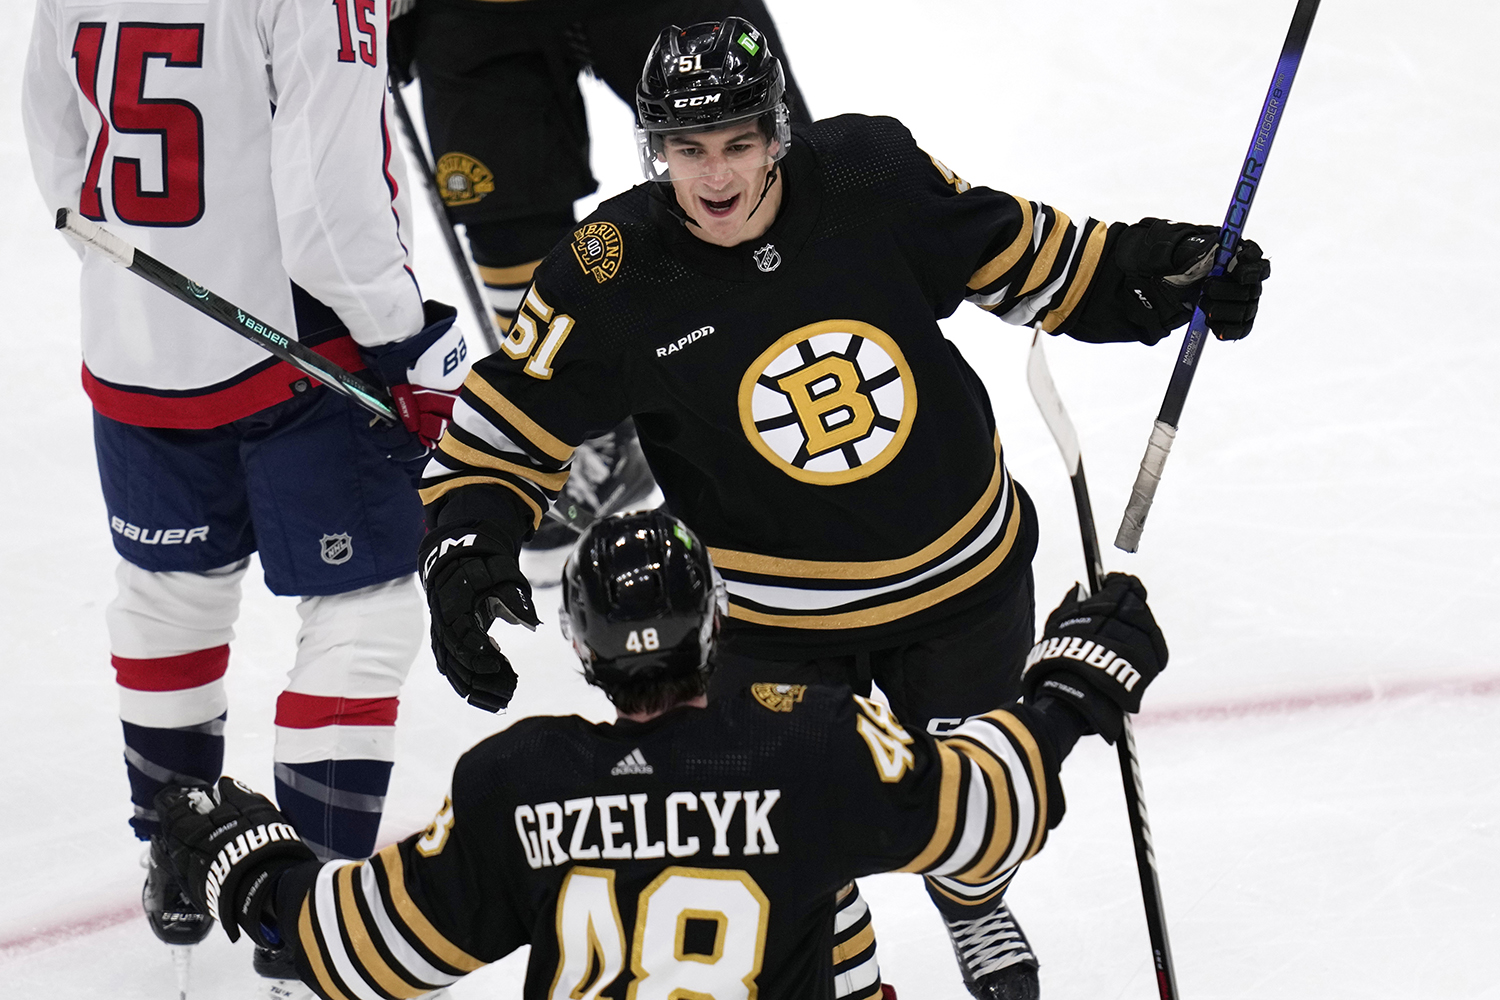 Bruins beat the winless Sharks 3-1 for their 3rd straight win to open the  season